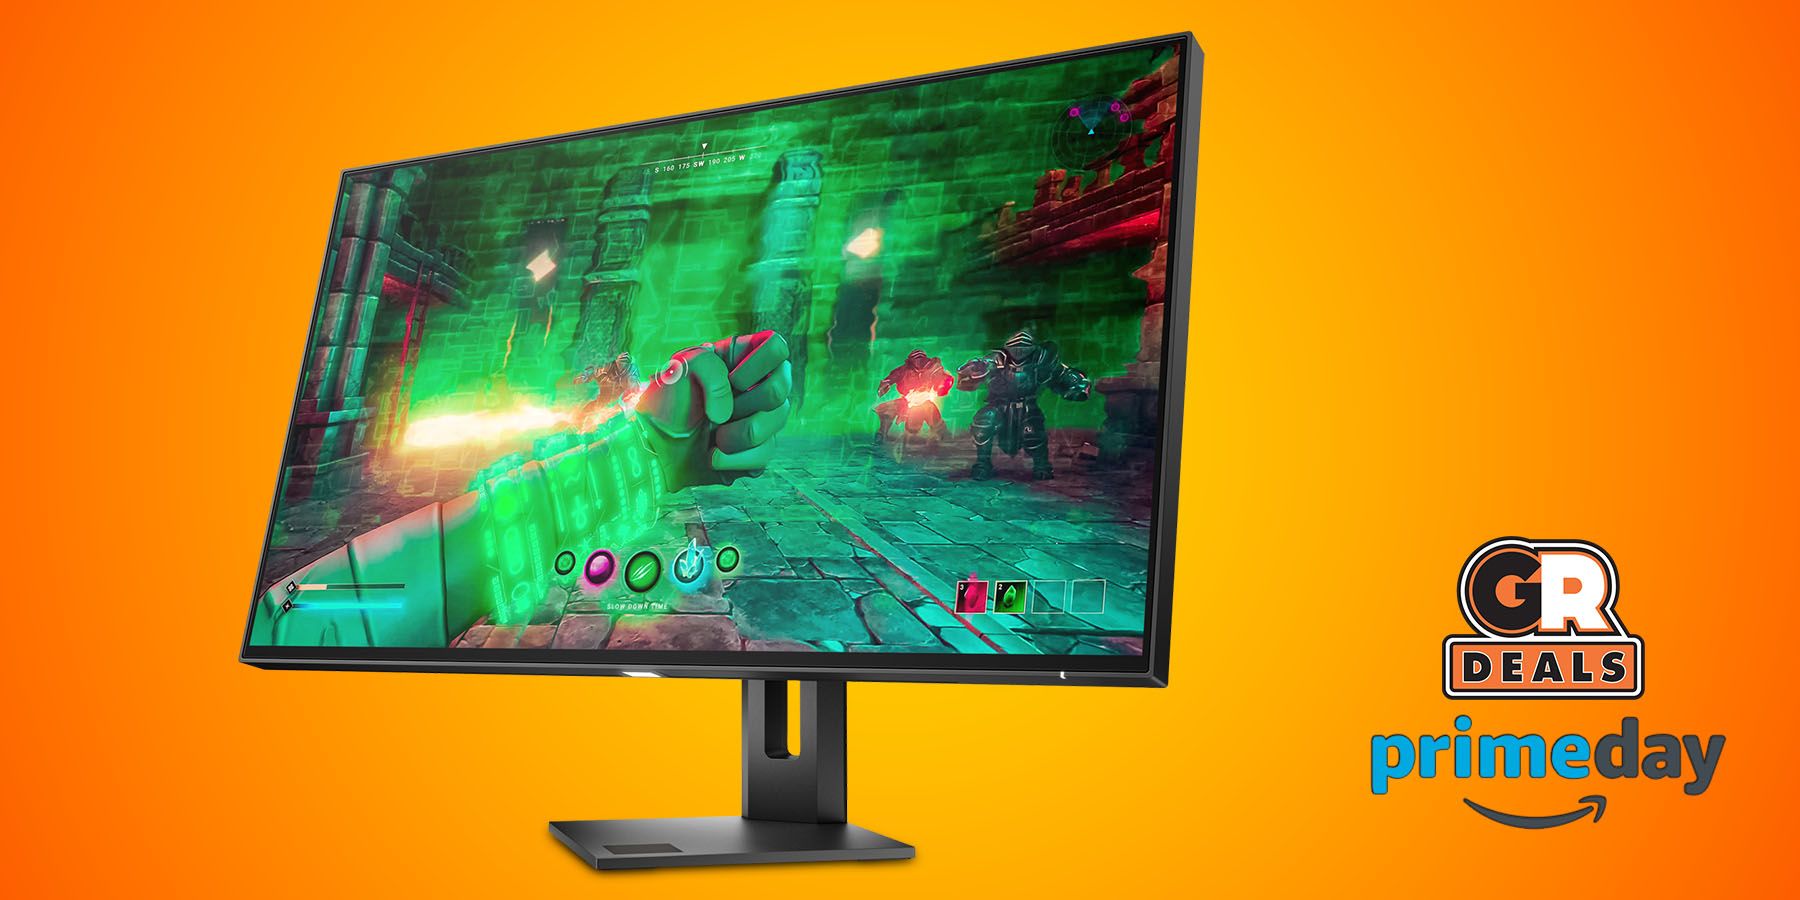 Discount Has the Omen 27u 4K Gaming Monitor at Just $549.99